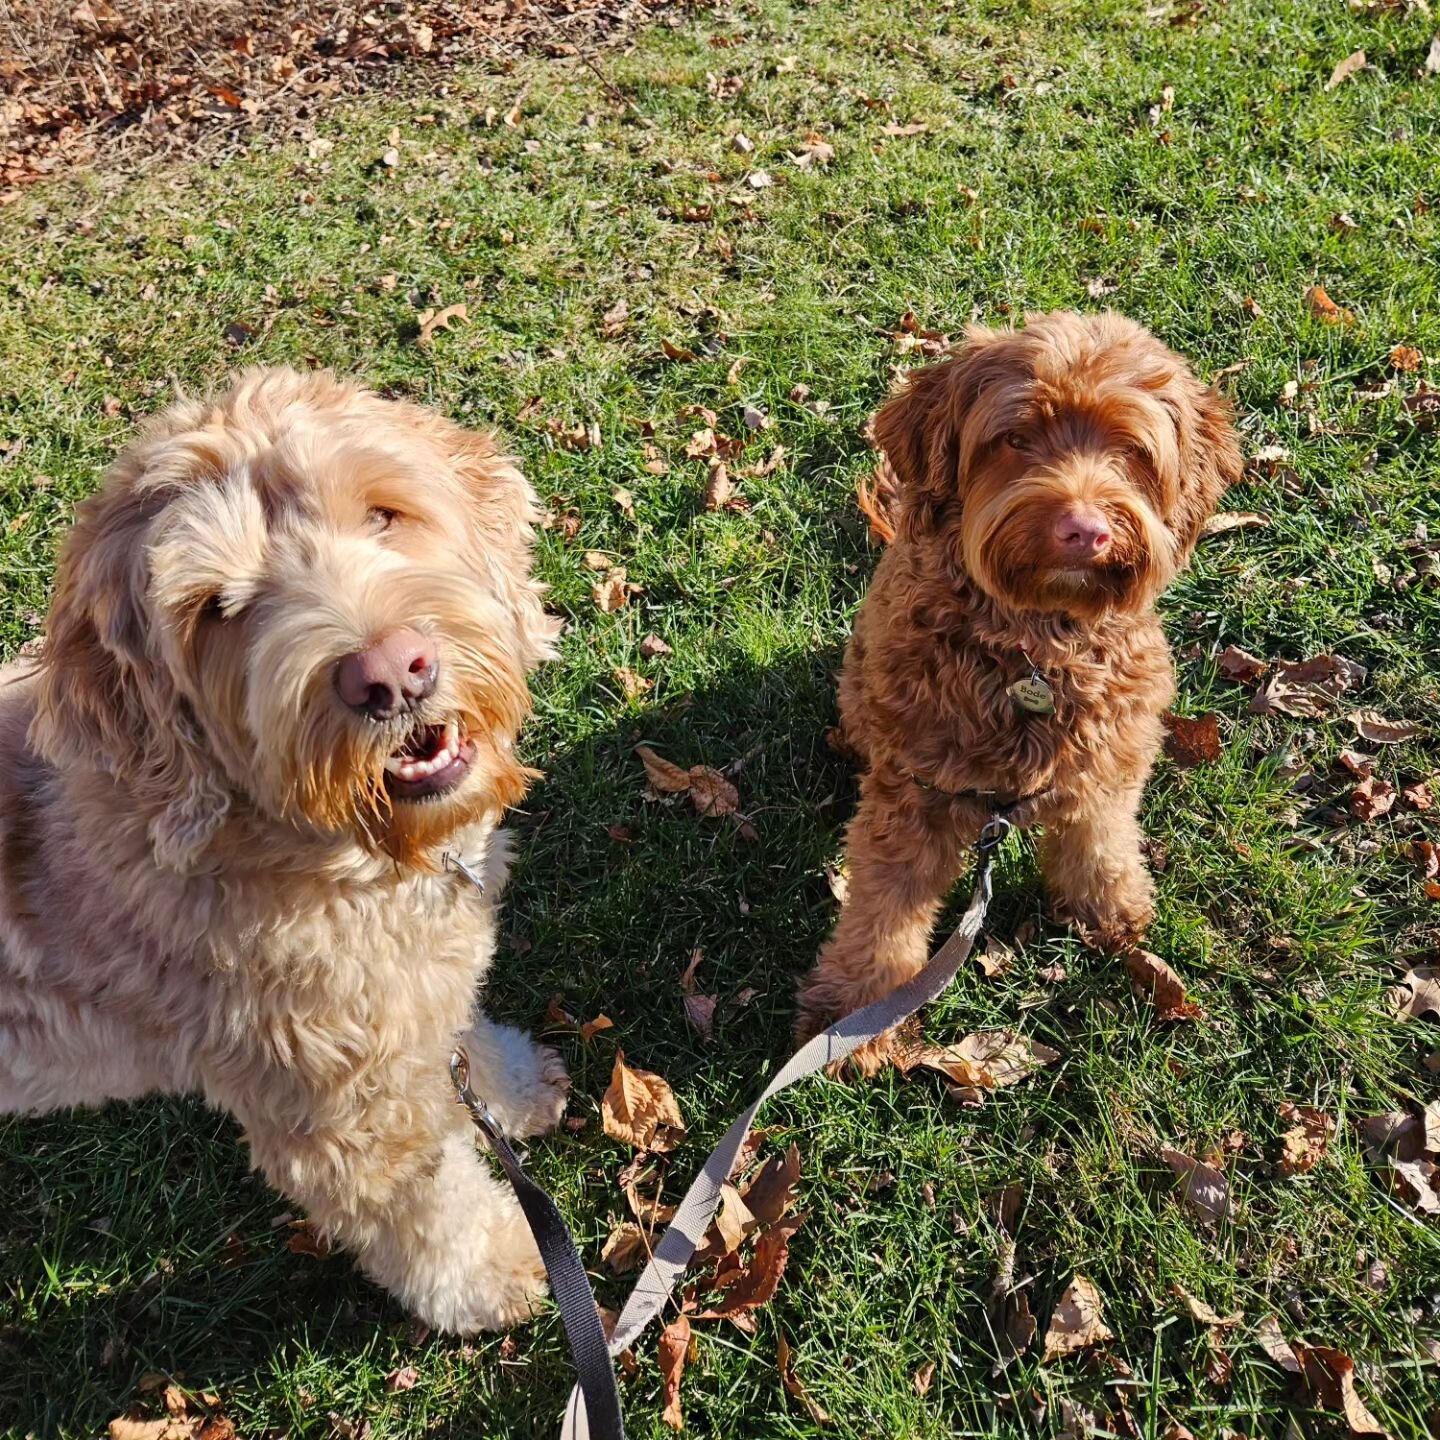 Bode &amp; Scout have been having some extra Lucky Paws adventures lately. How cute are they?!🐶🧡🐶
#dogsiblings